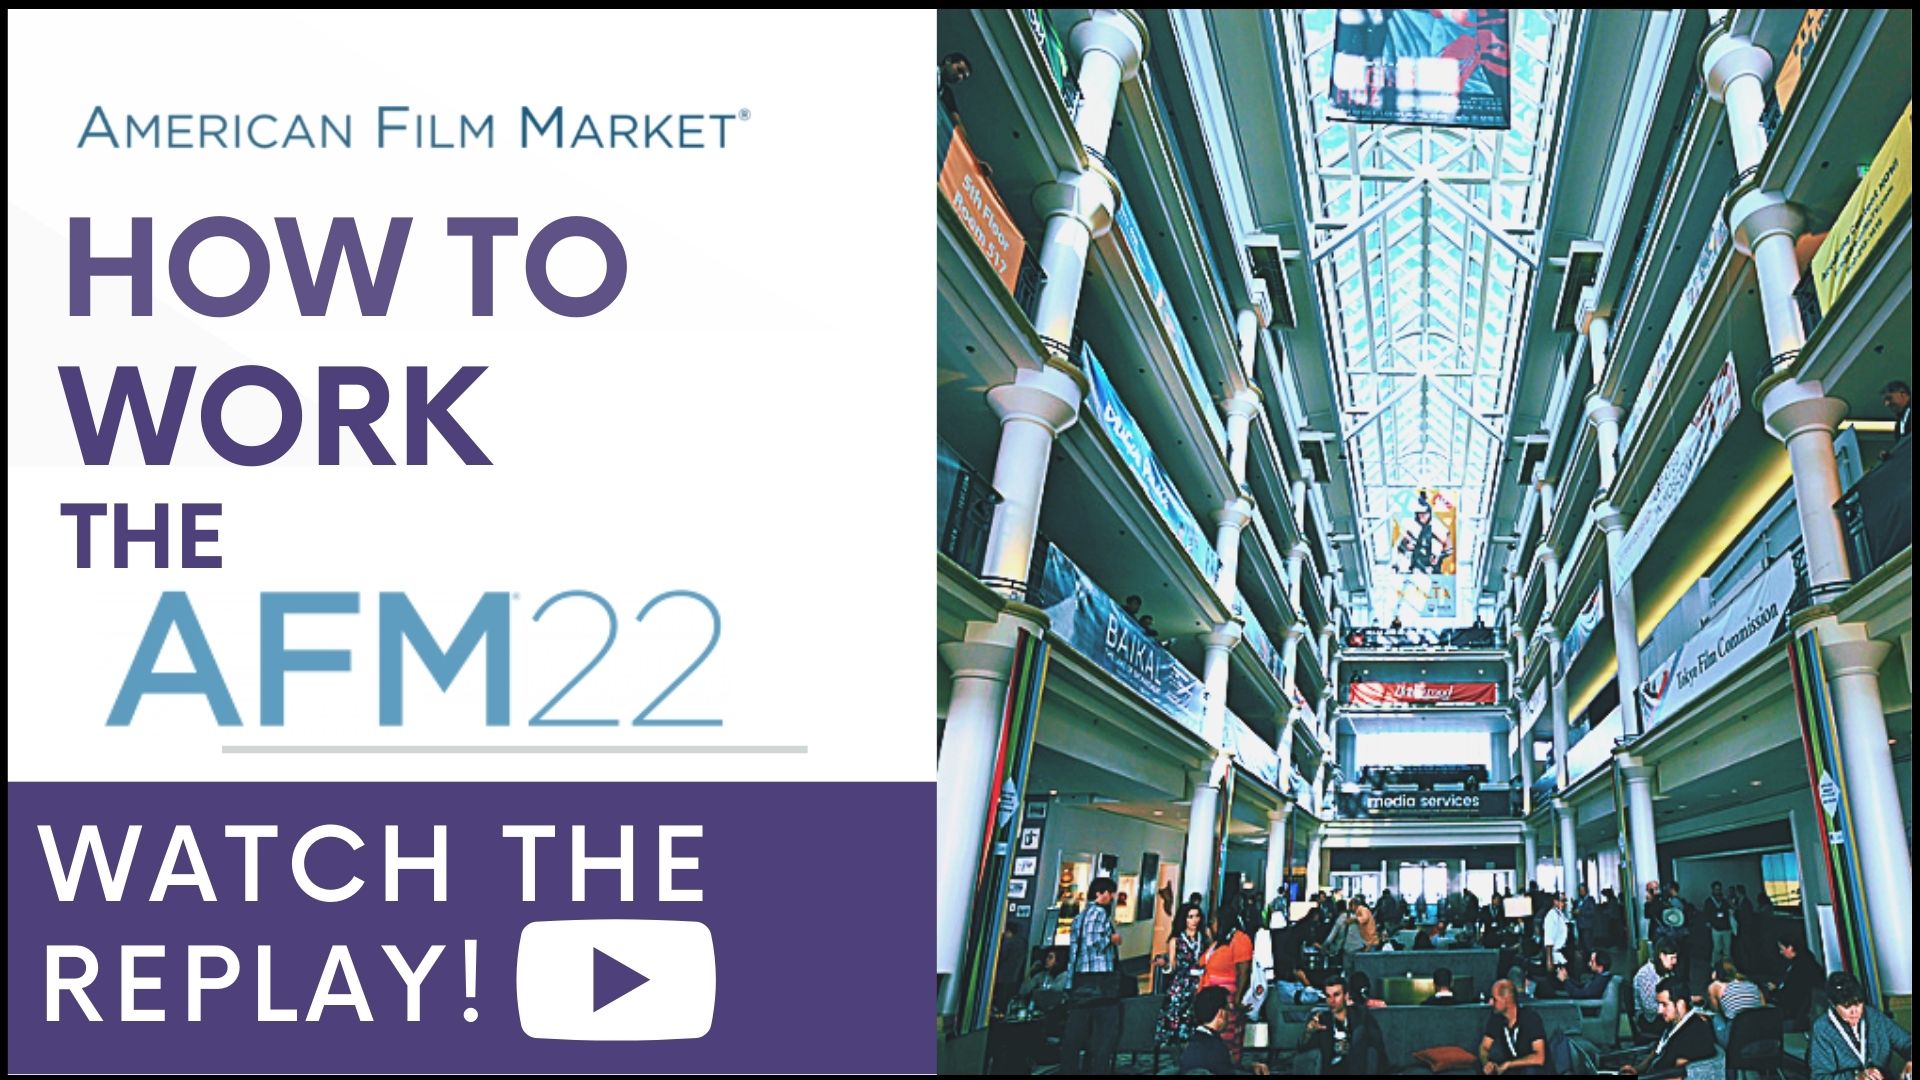 How to Work the AFM22 - Watch the Replay